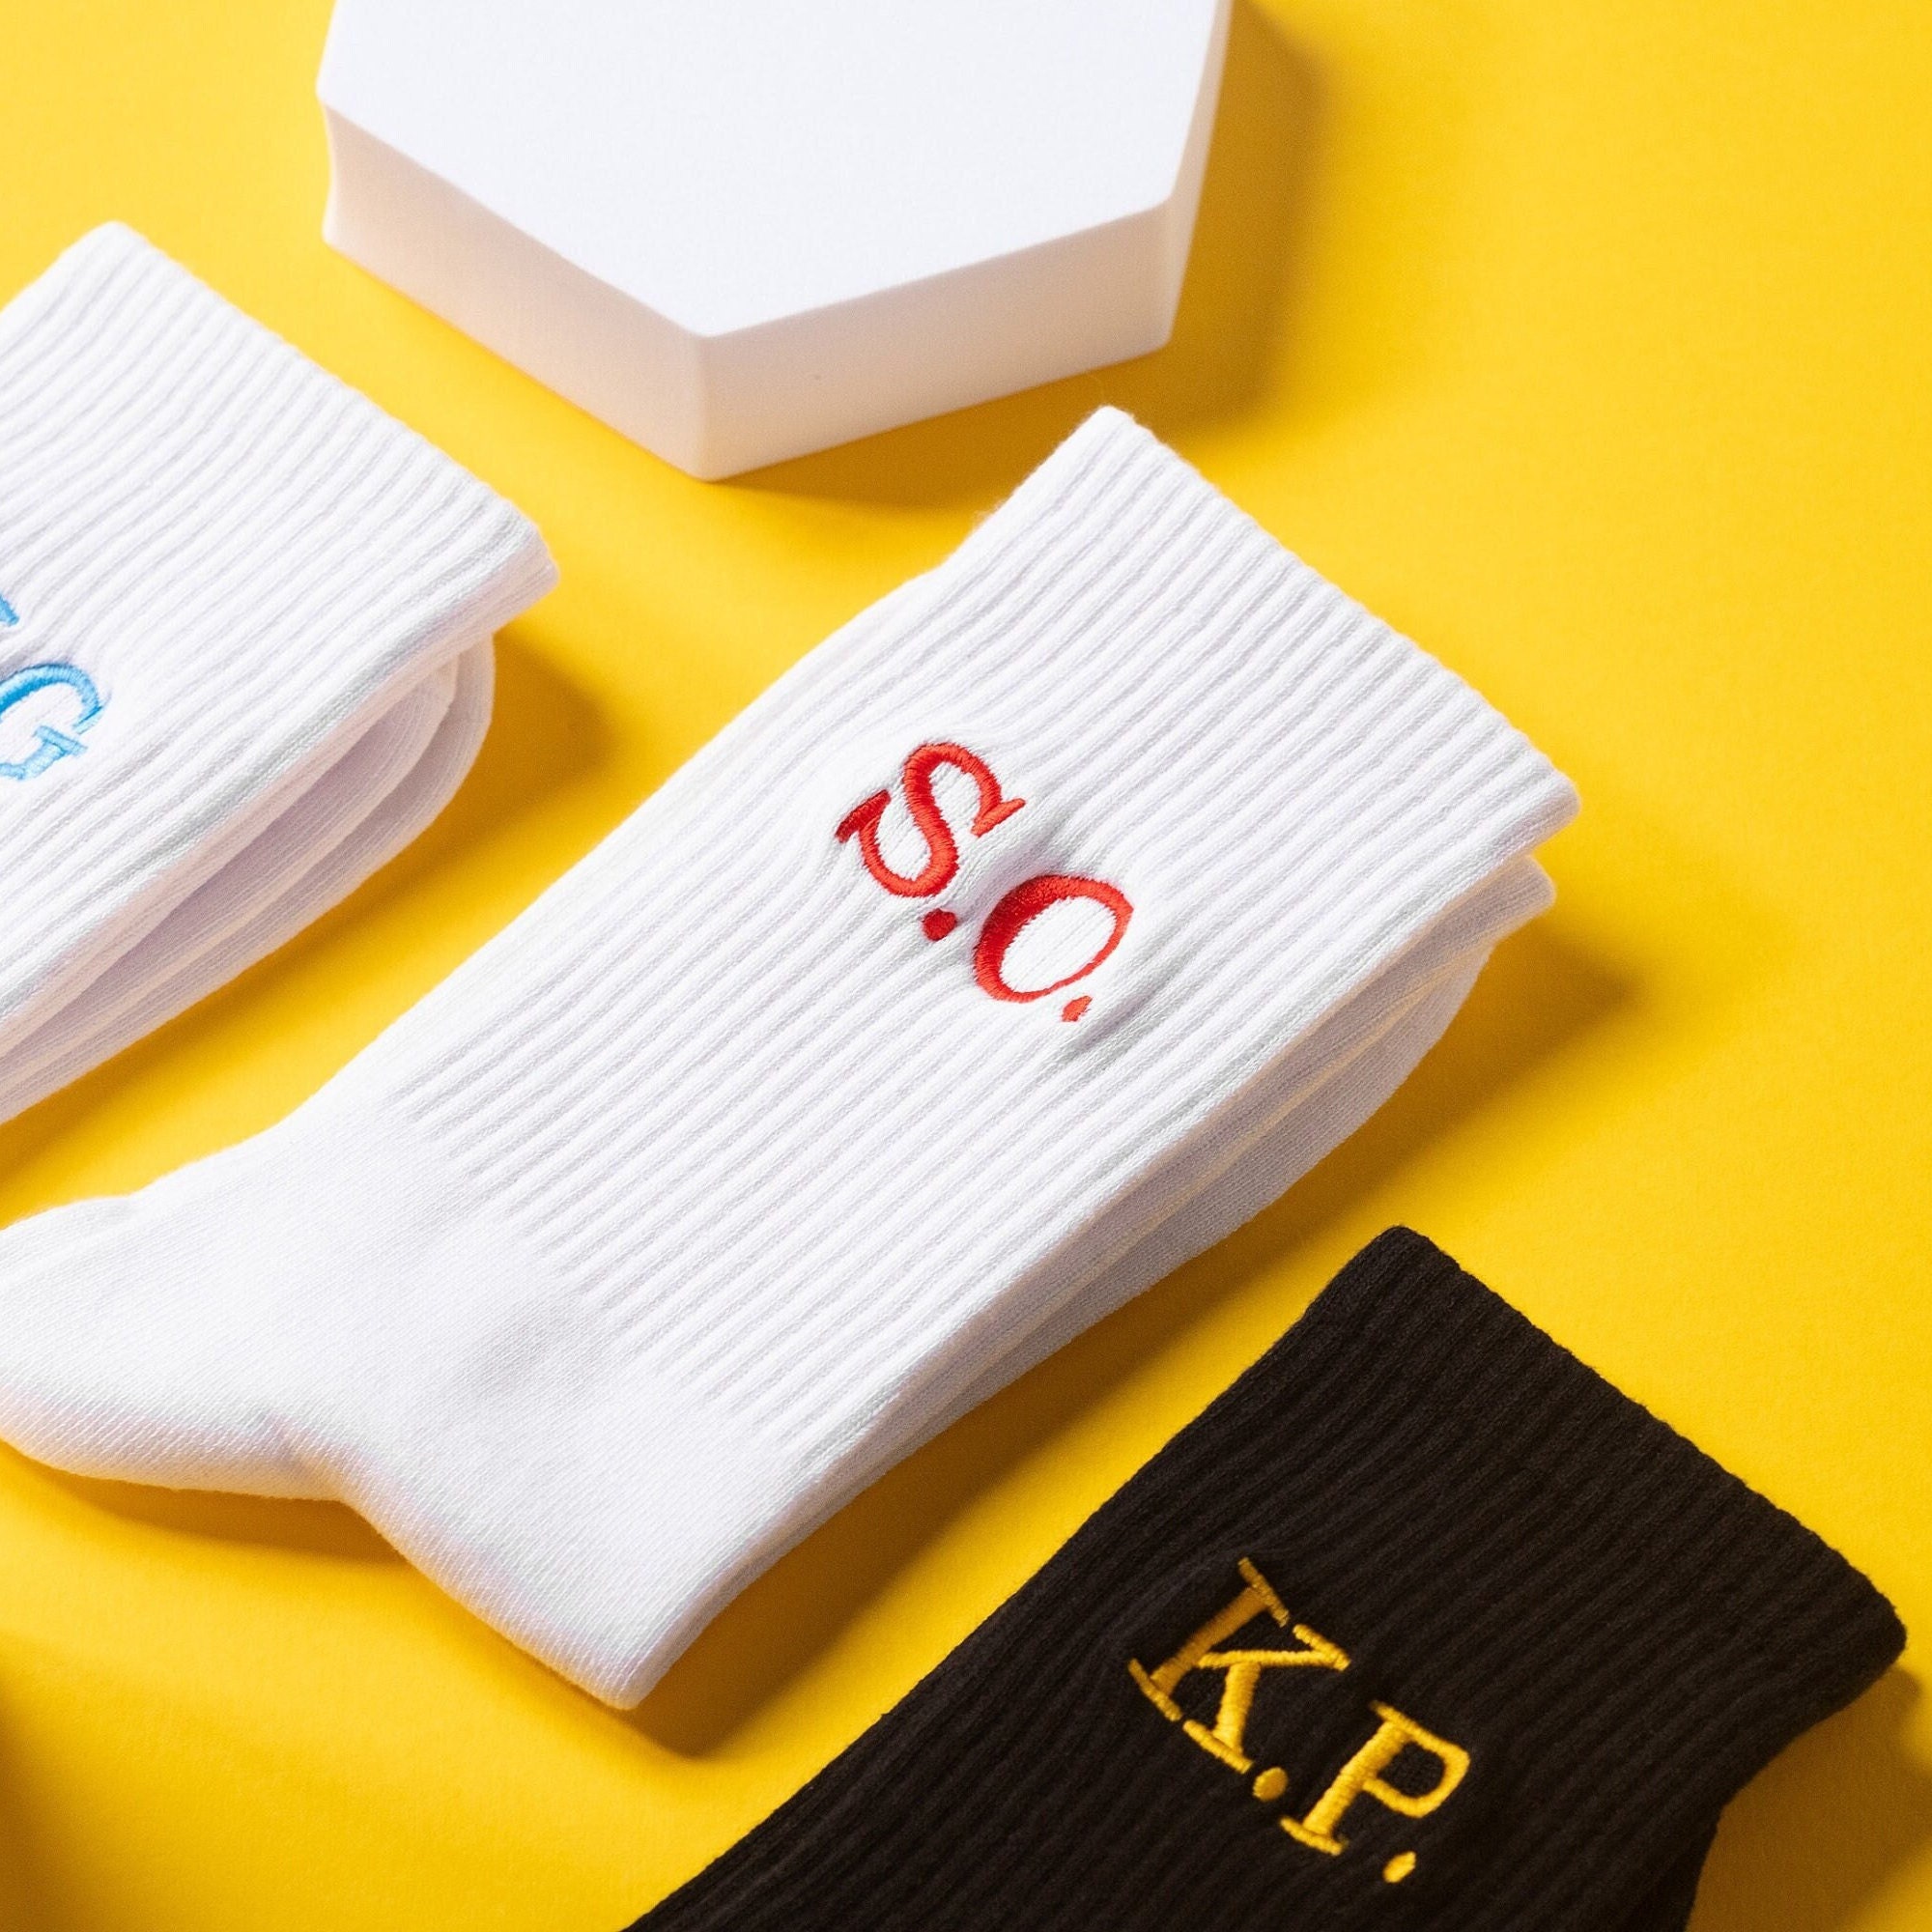 Personalised Initials Socks - Custom Embroidered On Unisex Cotton Crew Made To Order & in Britain